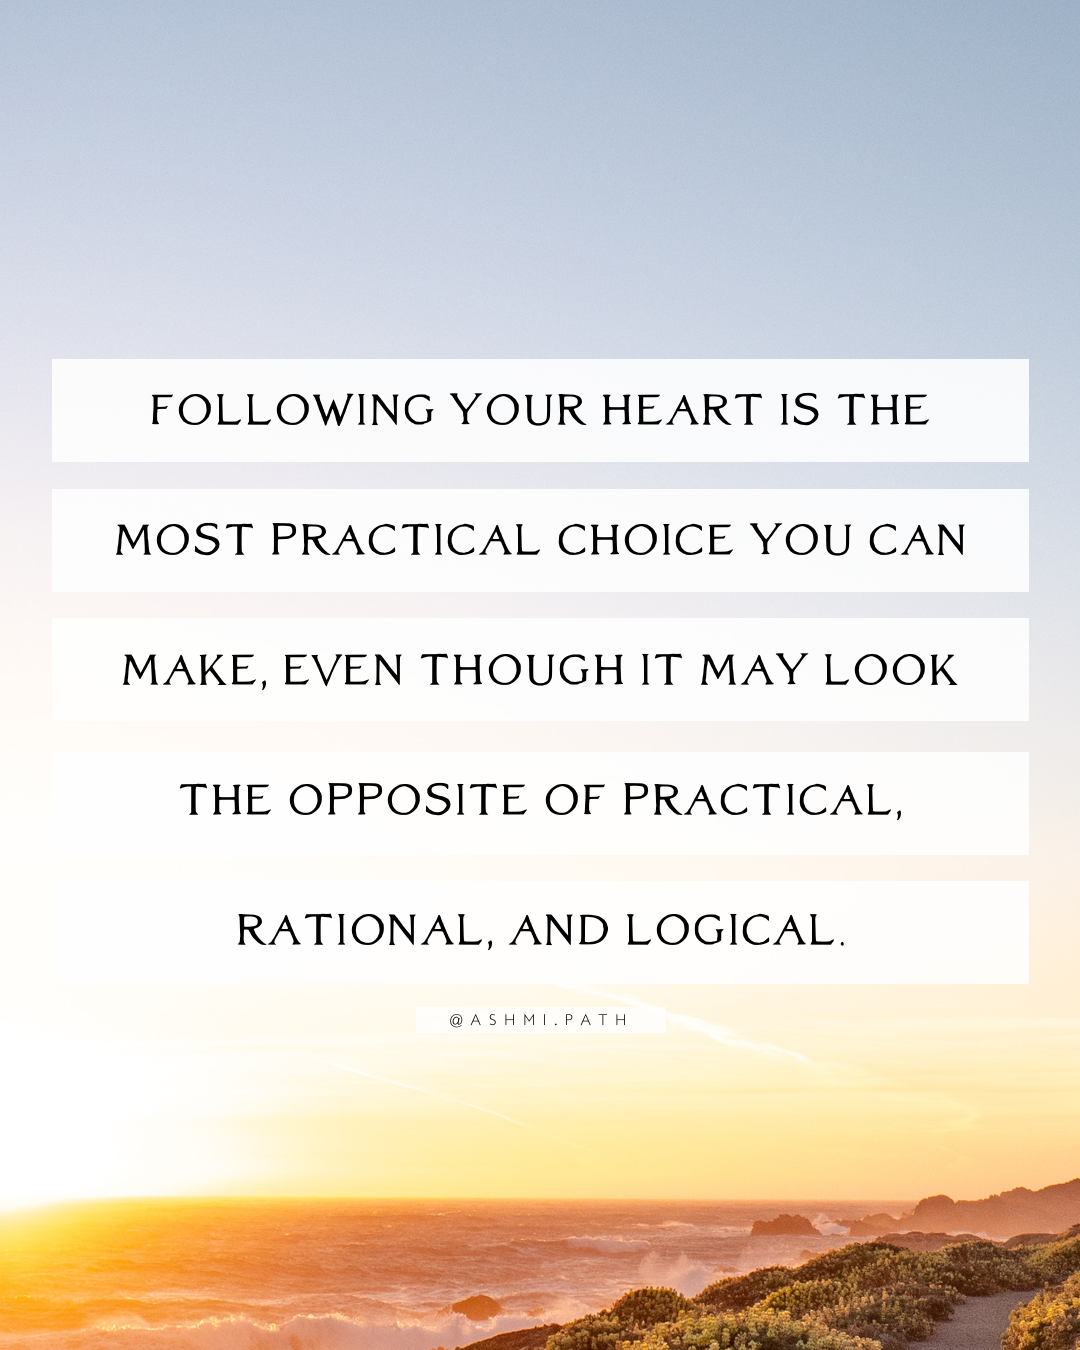 "Should I Follow my Heart or Make the Practical Choice?"